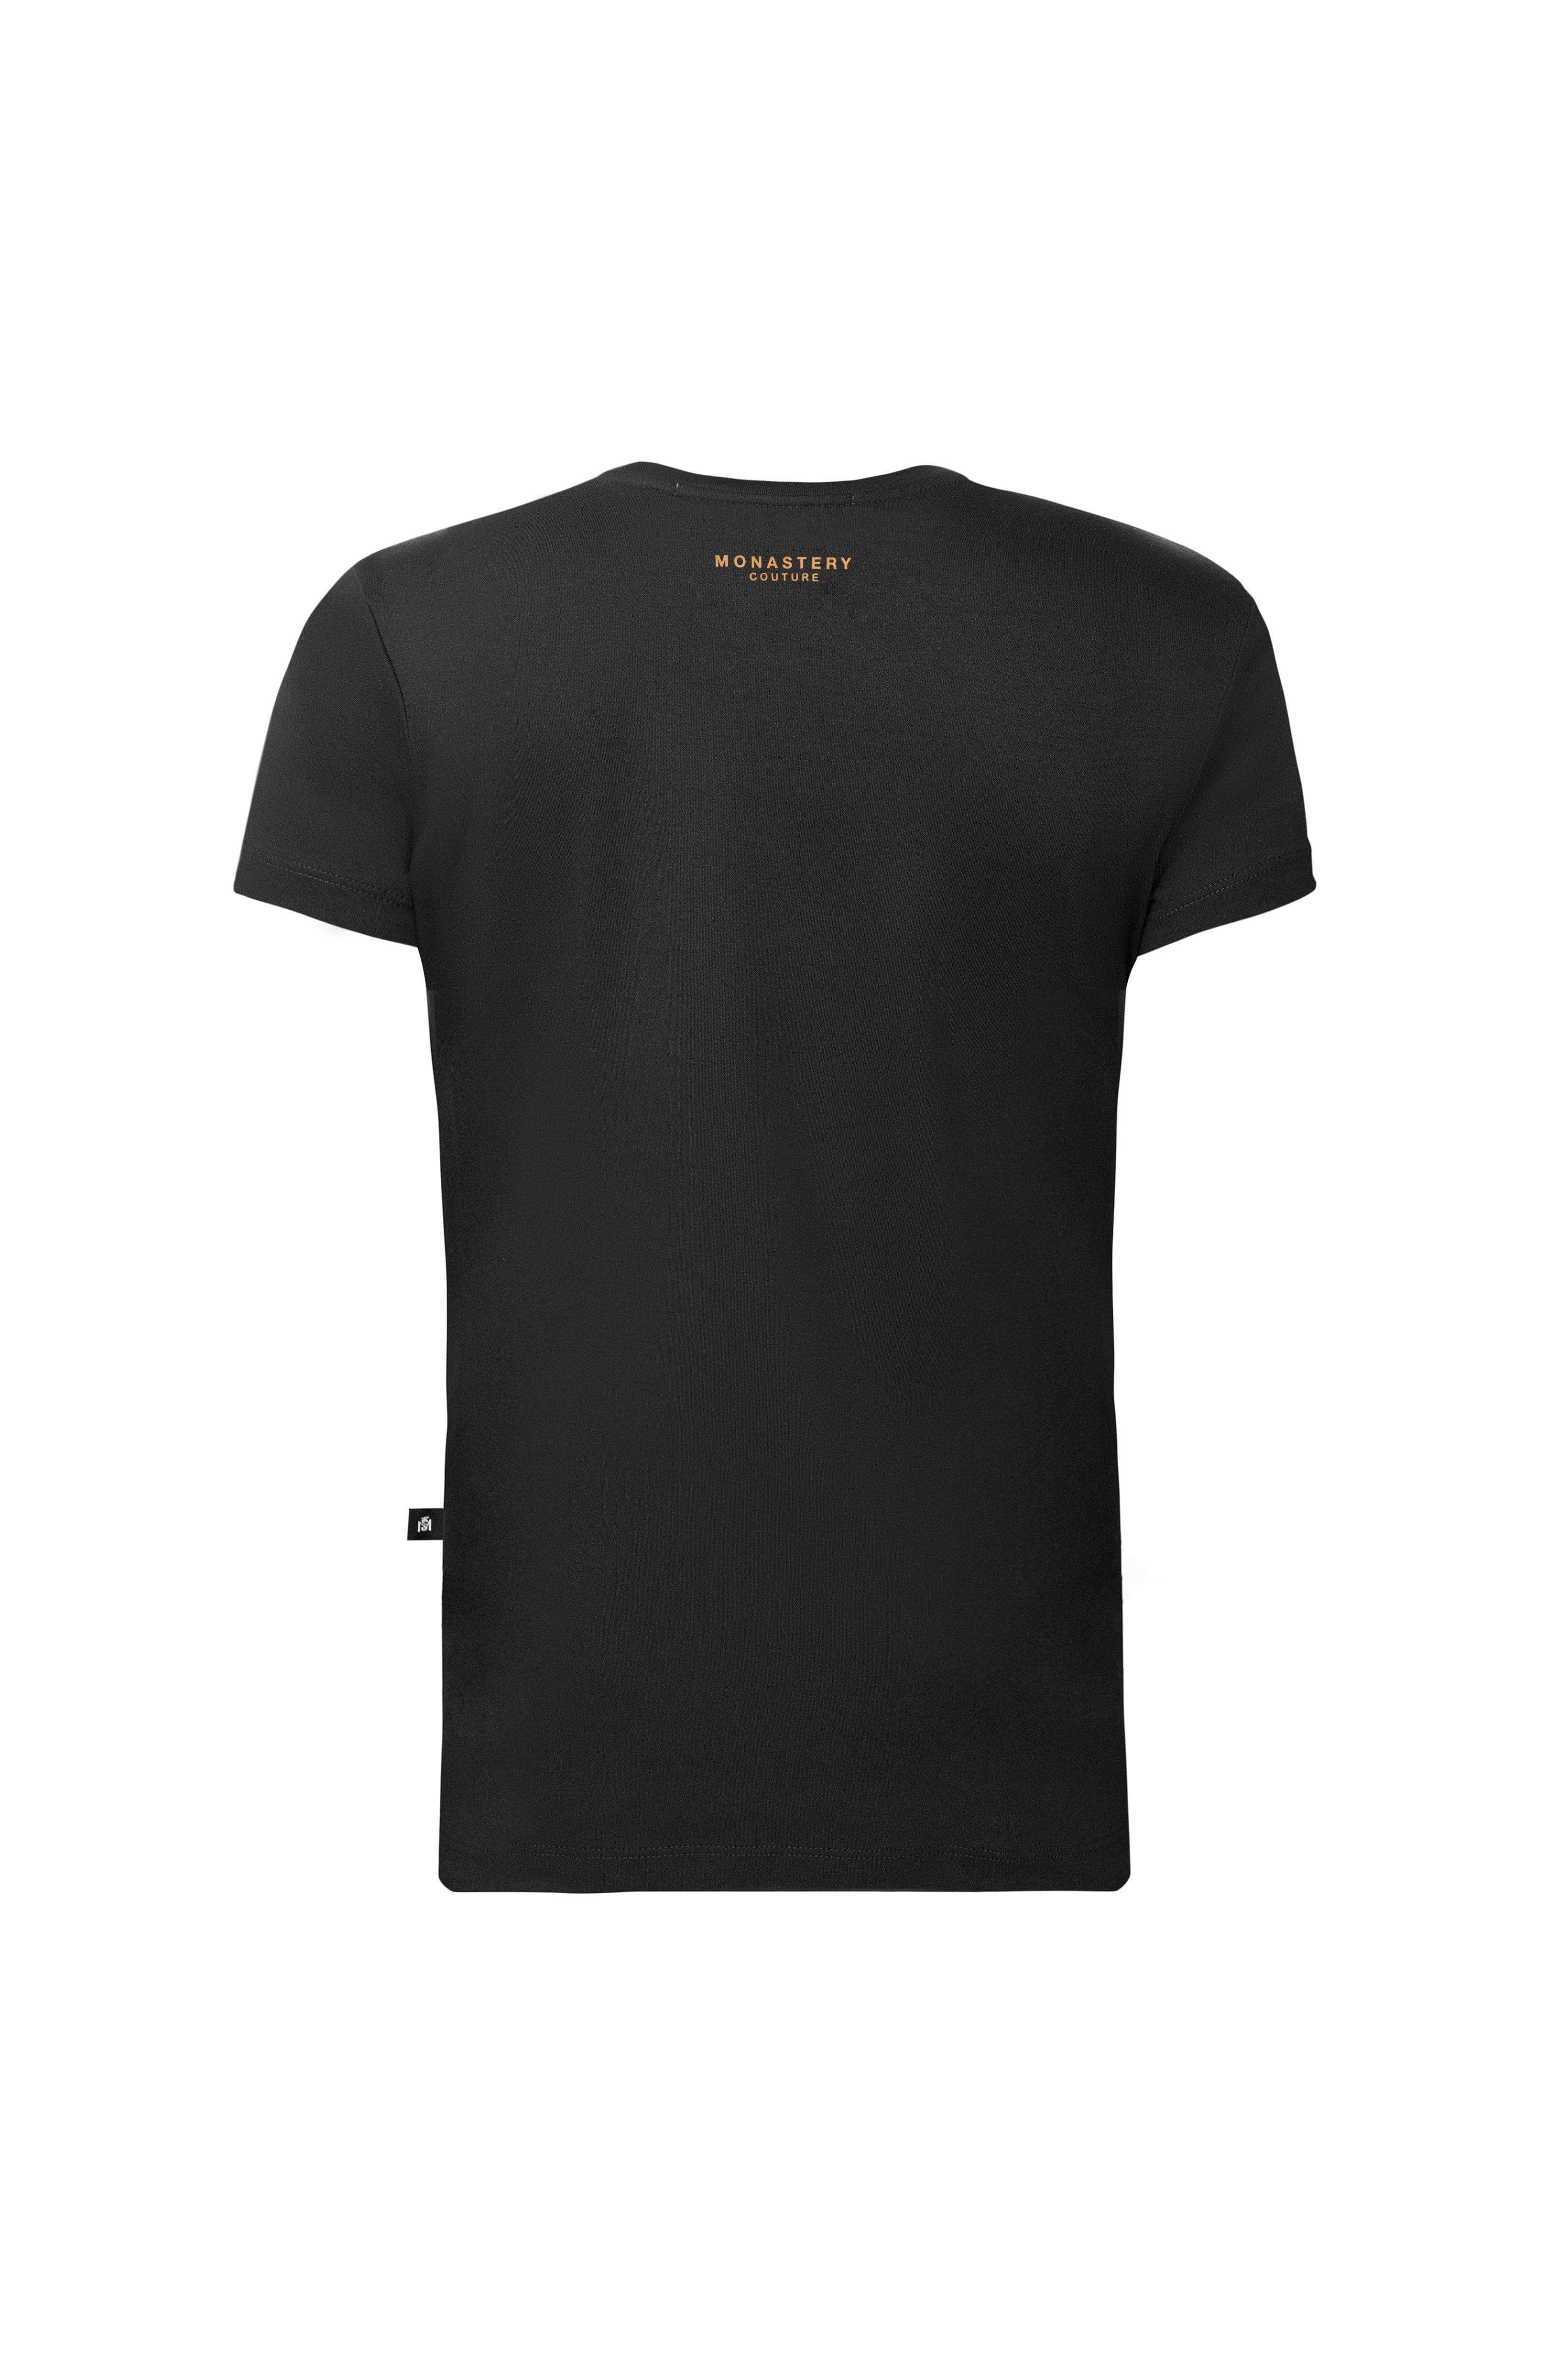 ANNECY T-SHIRT BLACK | Monastery Couture